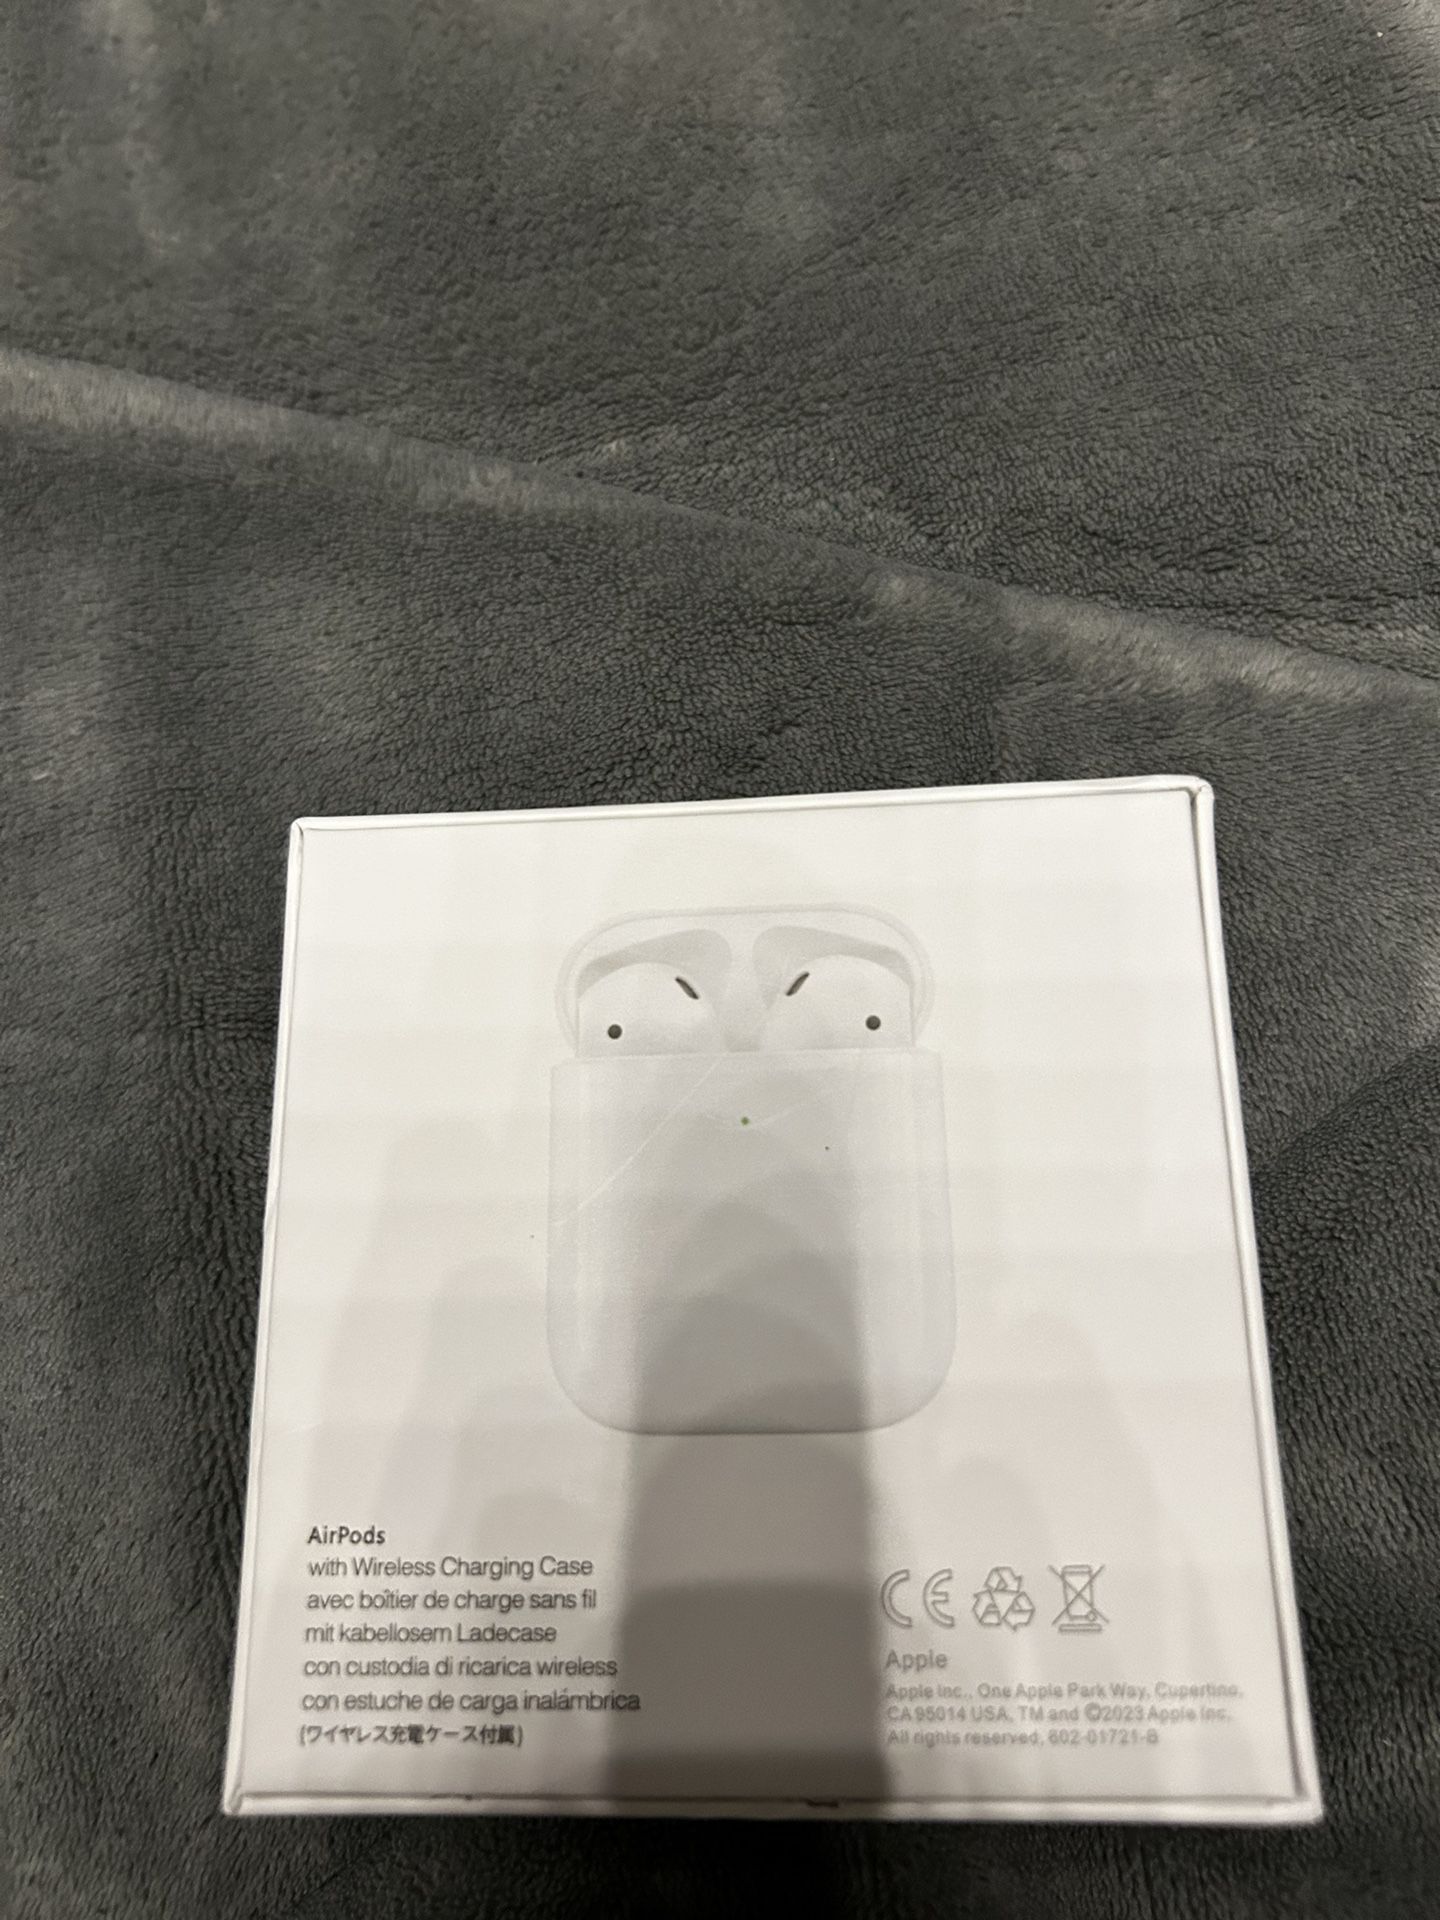 Apple AirPods 2nd Generation with Charging Case - White Best AirPod Deal.